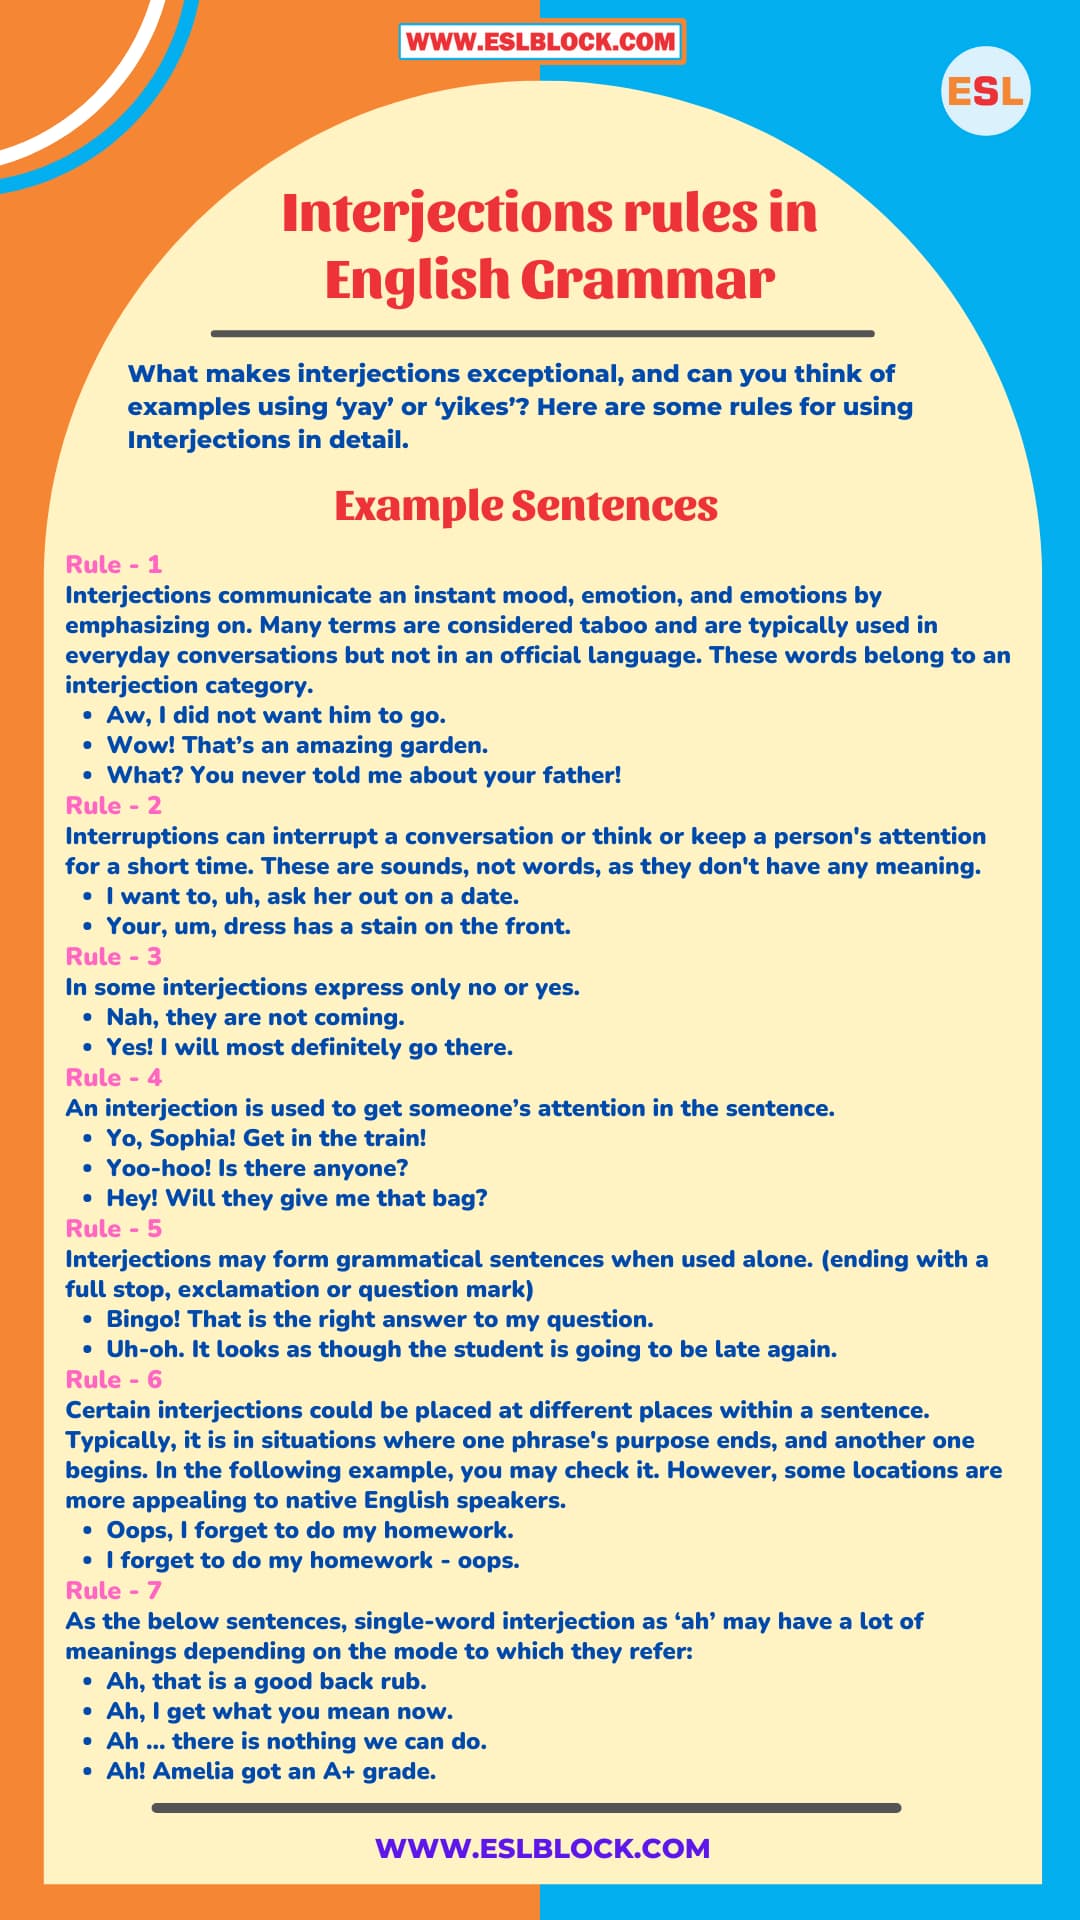 100 Example Sentences Using Interjections, Examples of Interjections, Interjections Exercises, Interjections List, Interjections Rules, Rules of Using Interjections with examples, Types of Interjections, What are Interjections, What does a Interjections do, What is a Interjection